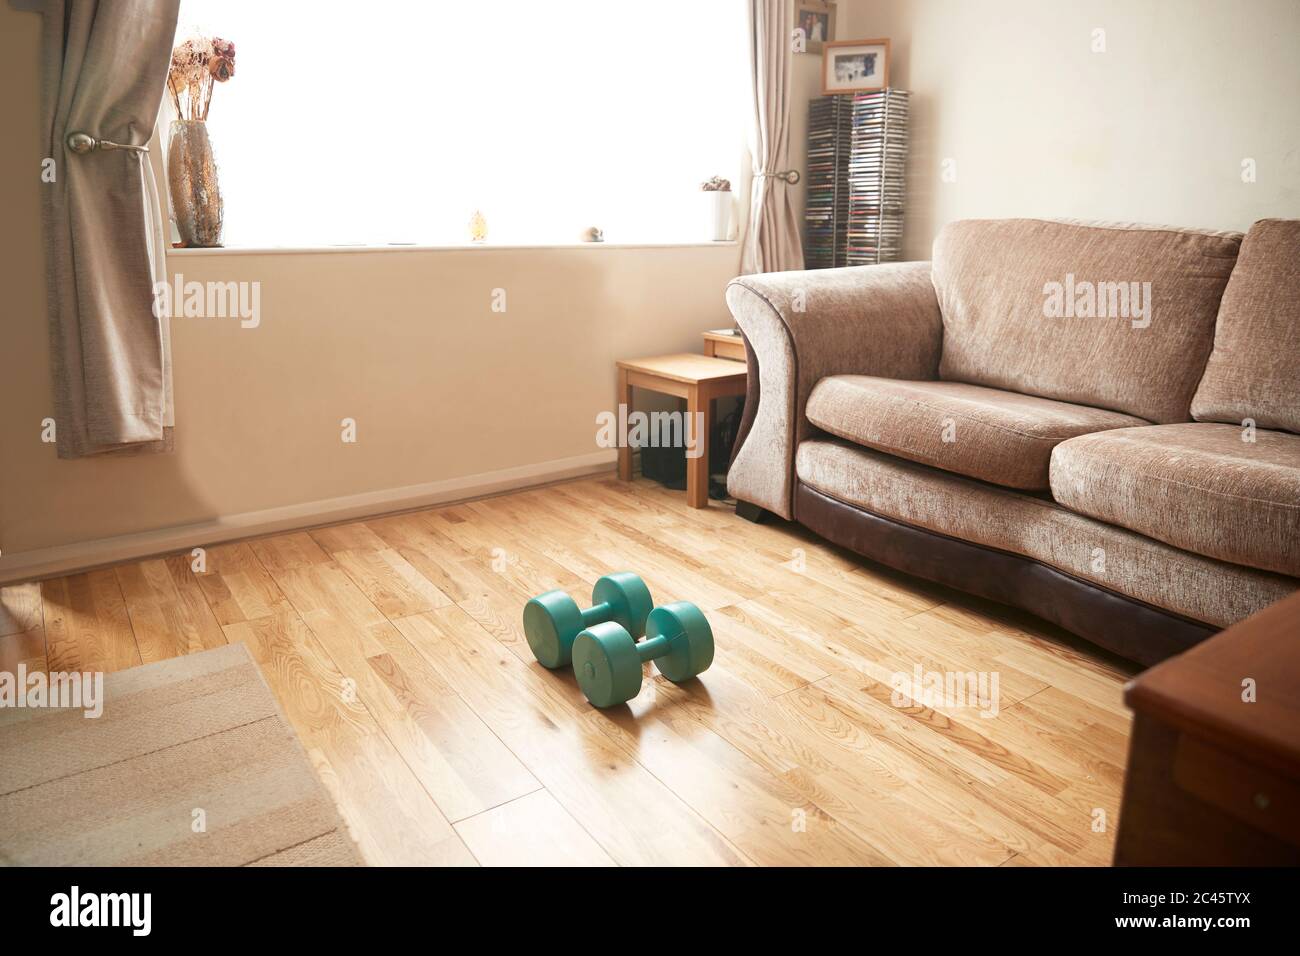 Interior view of living room with turquoise dumbbells lying on wooden floor in front of a brown sofa. Stock Photo